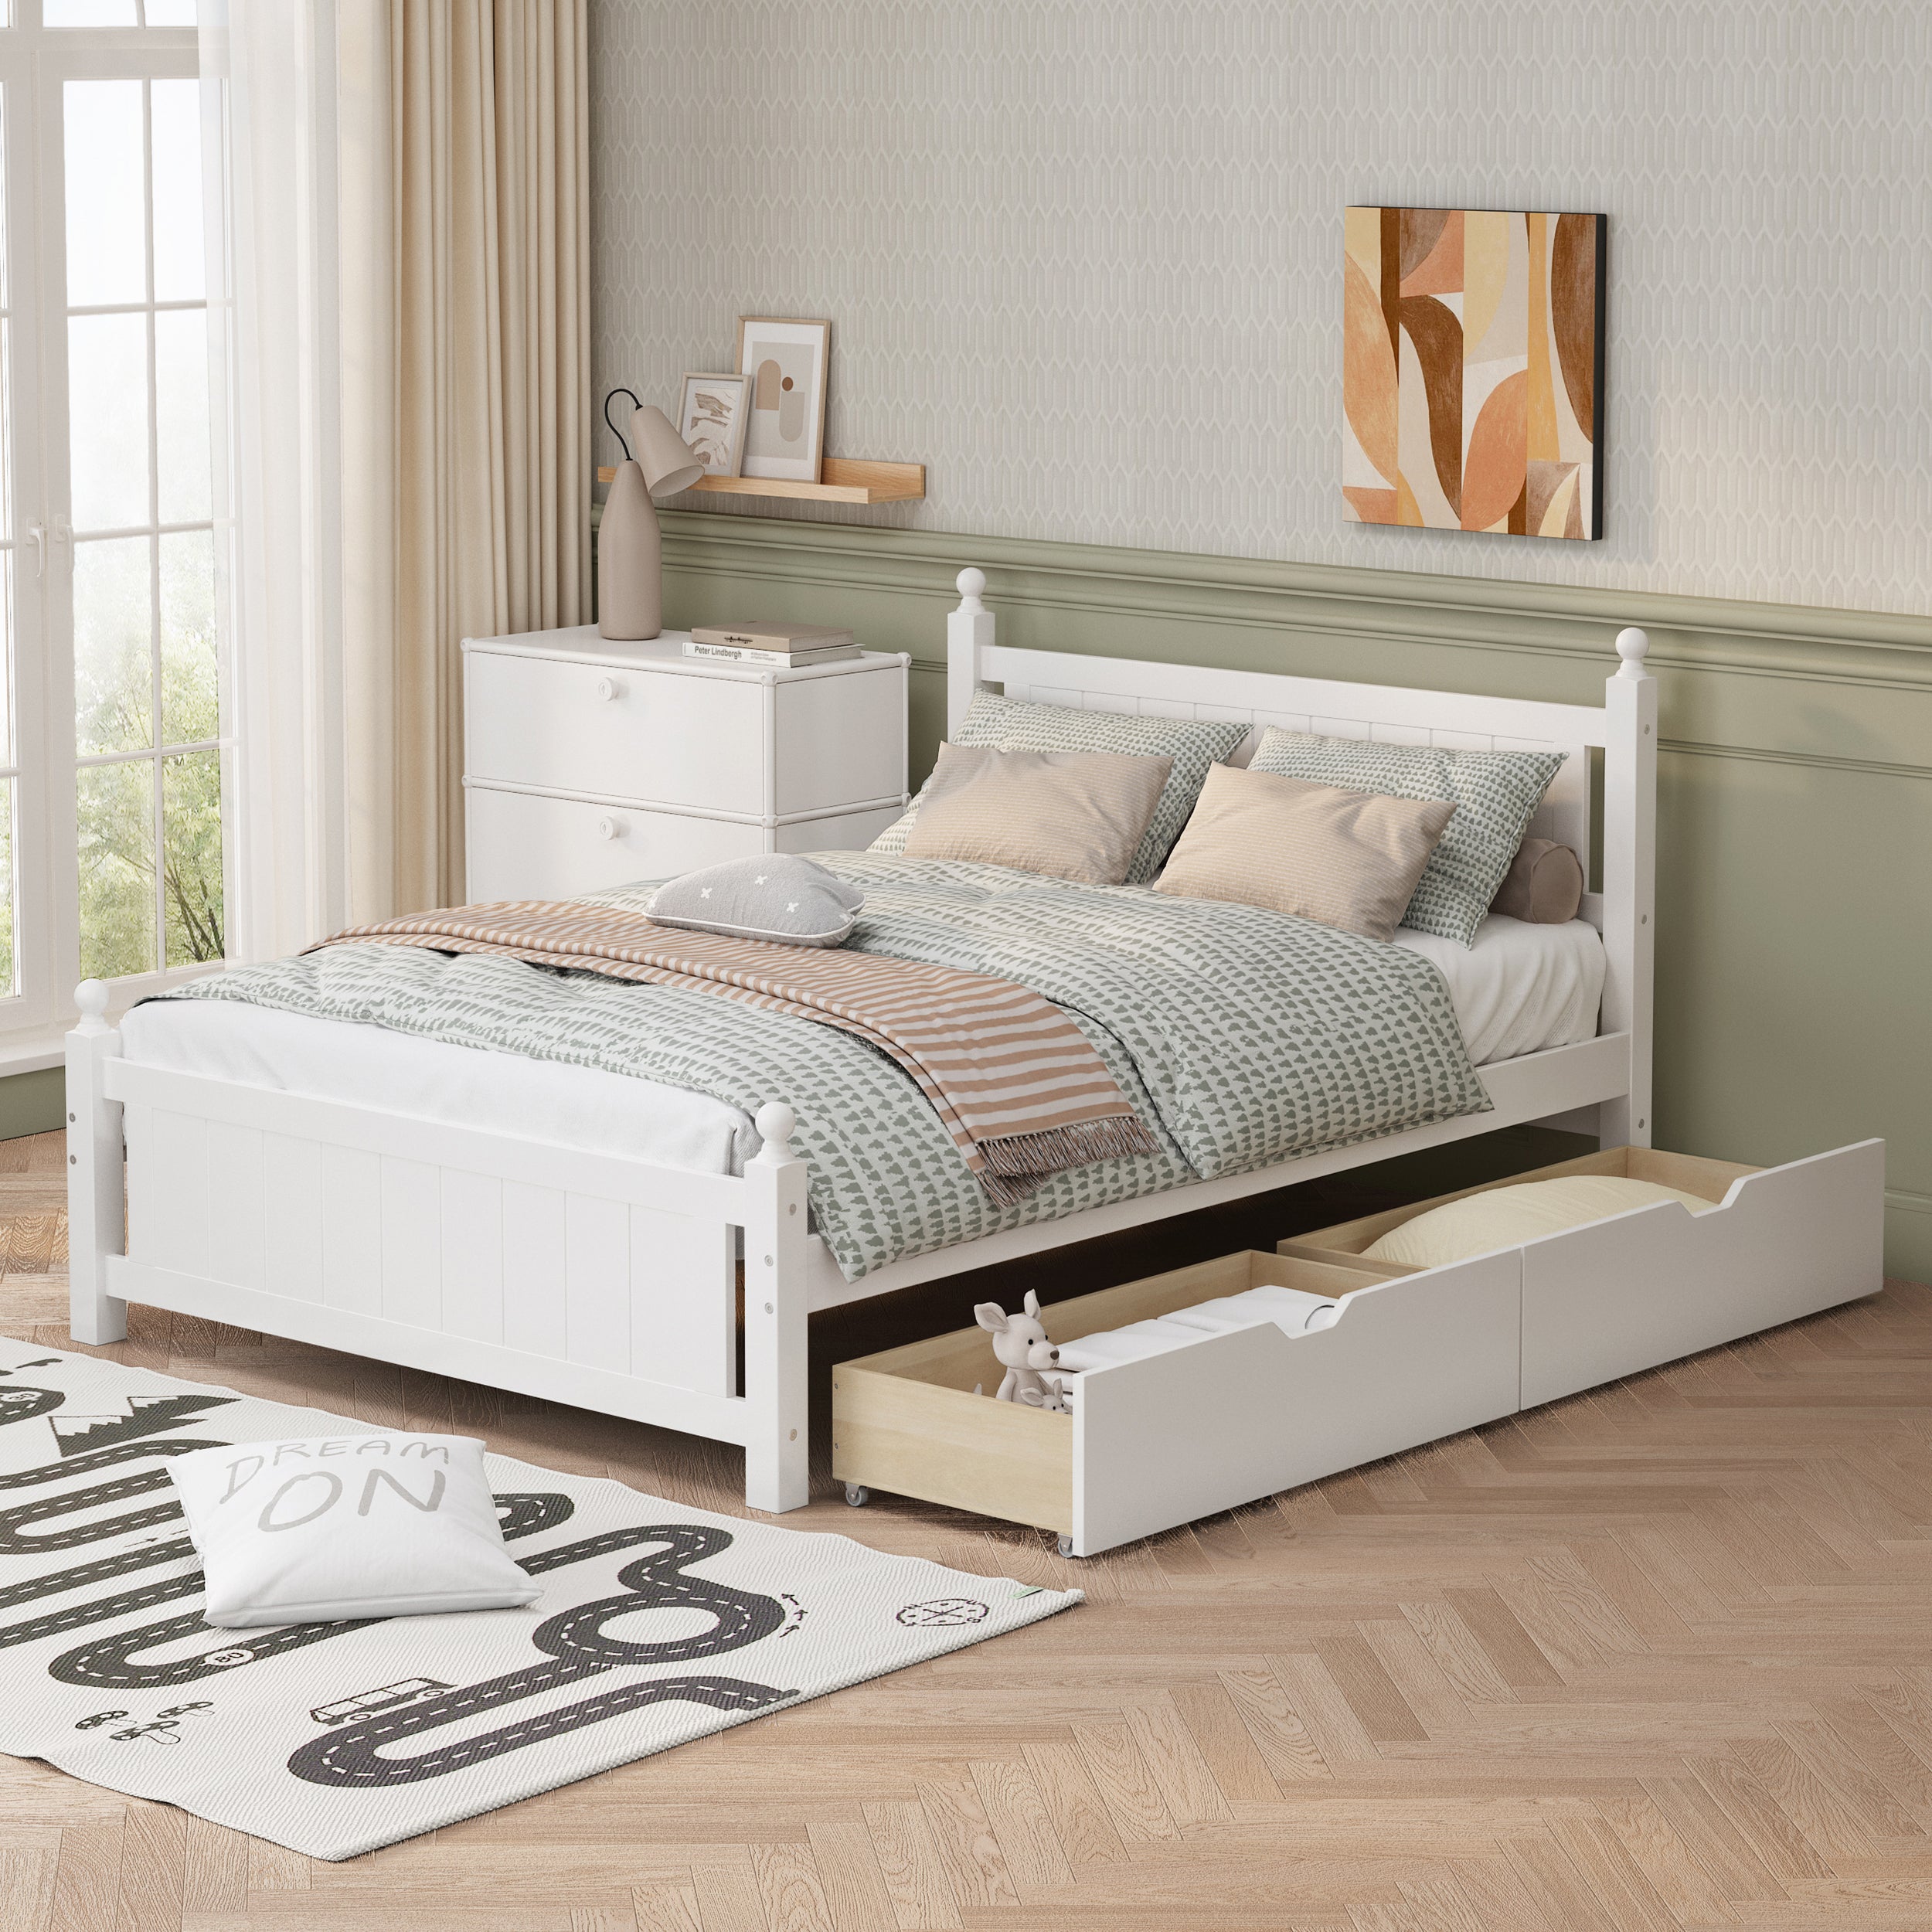 Full-Size-Solid-Wood-Platform-Bed-Frame-with-2-drawers-,-White-Kids-Beds